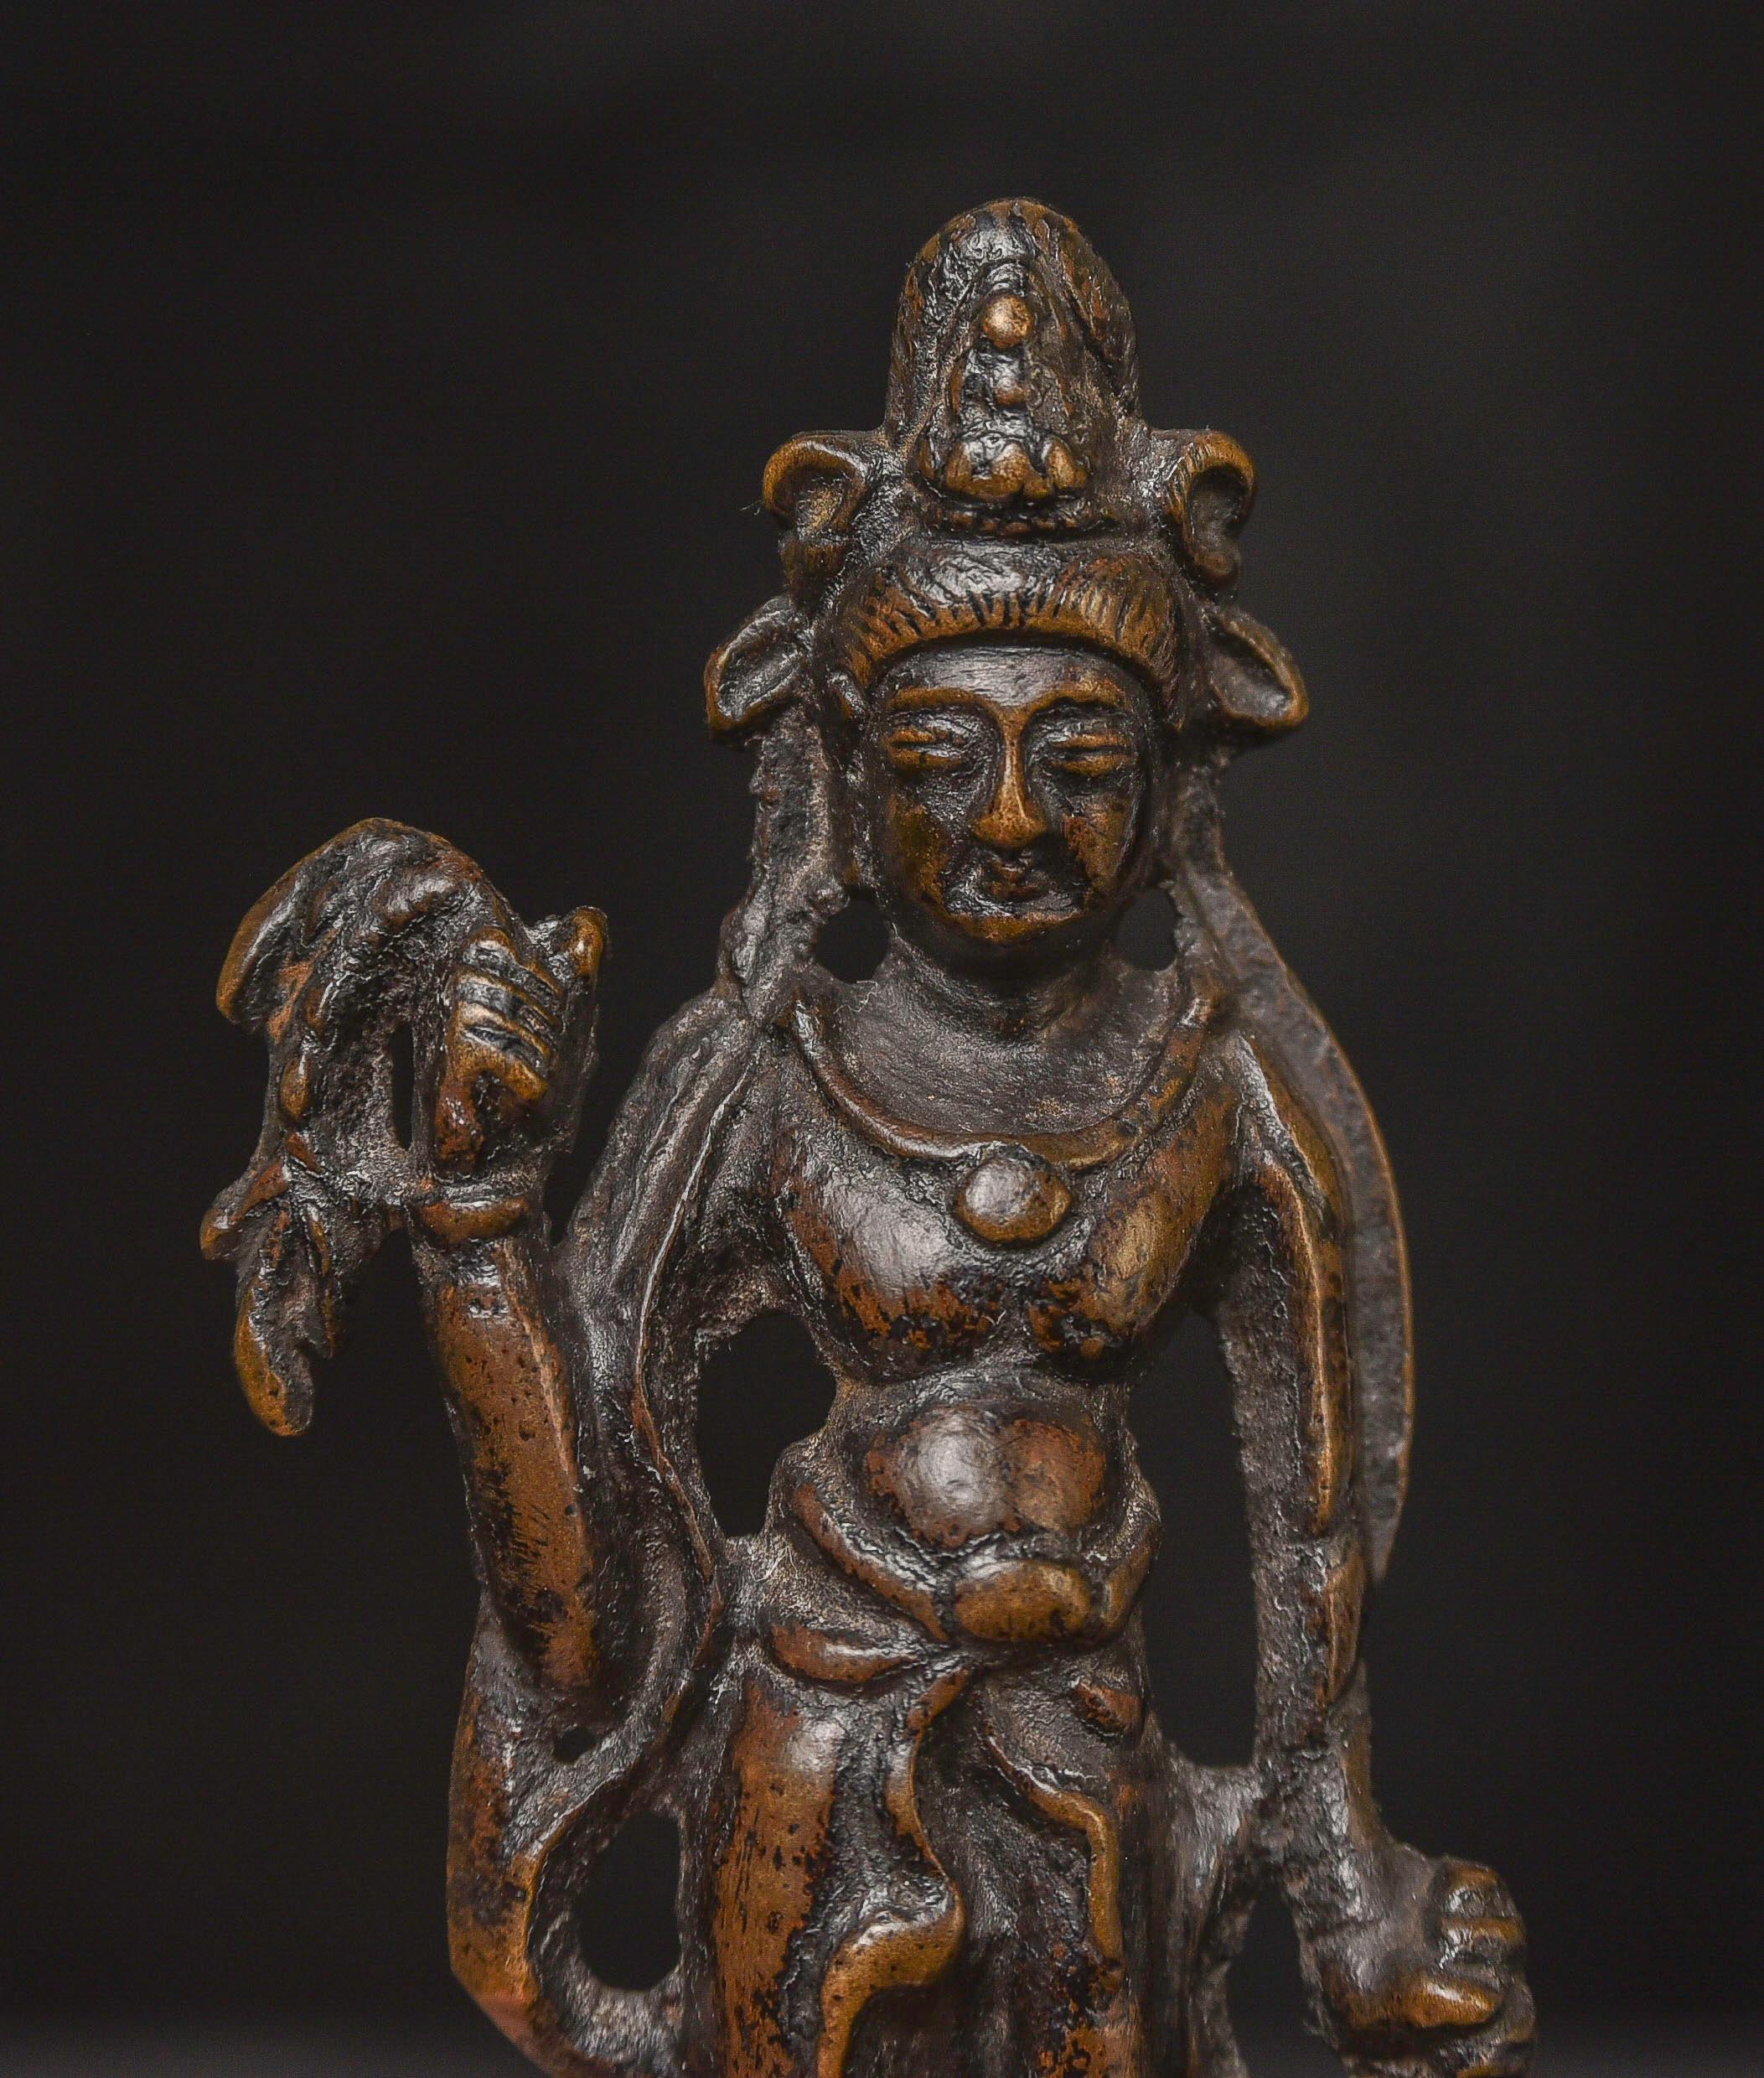  6-9th C Chinese Bronze Bodhisattva of Compassion from the Tang Dynasty - 9685 For Sale 6